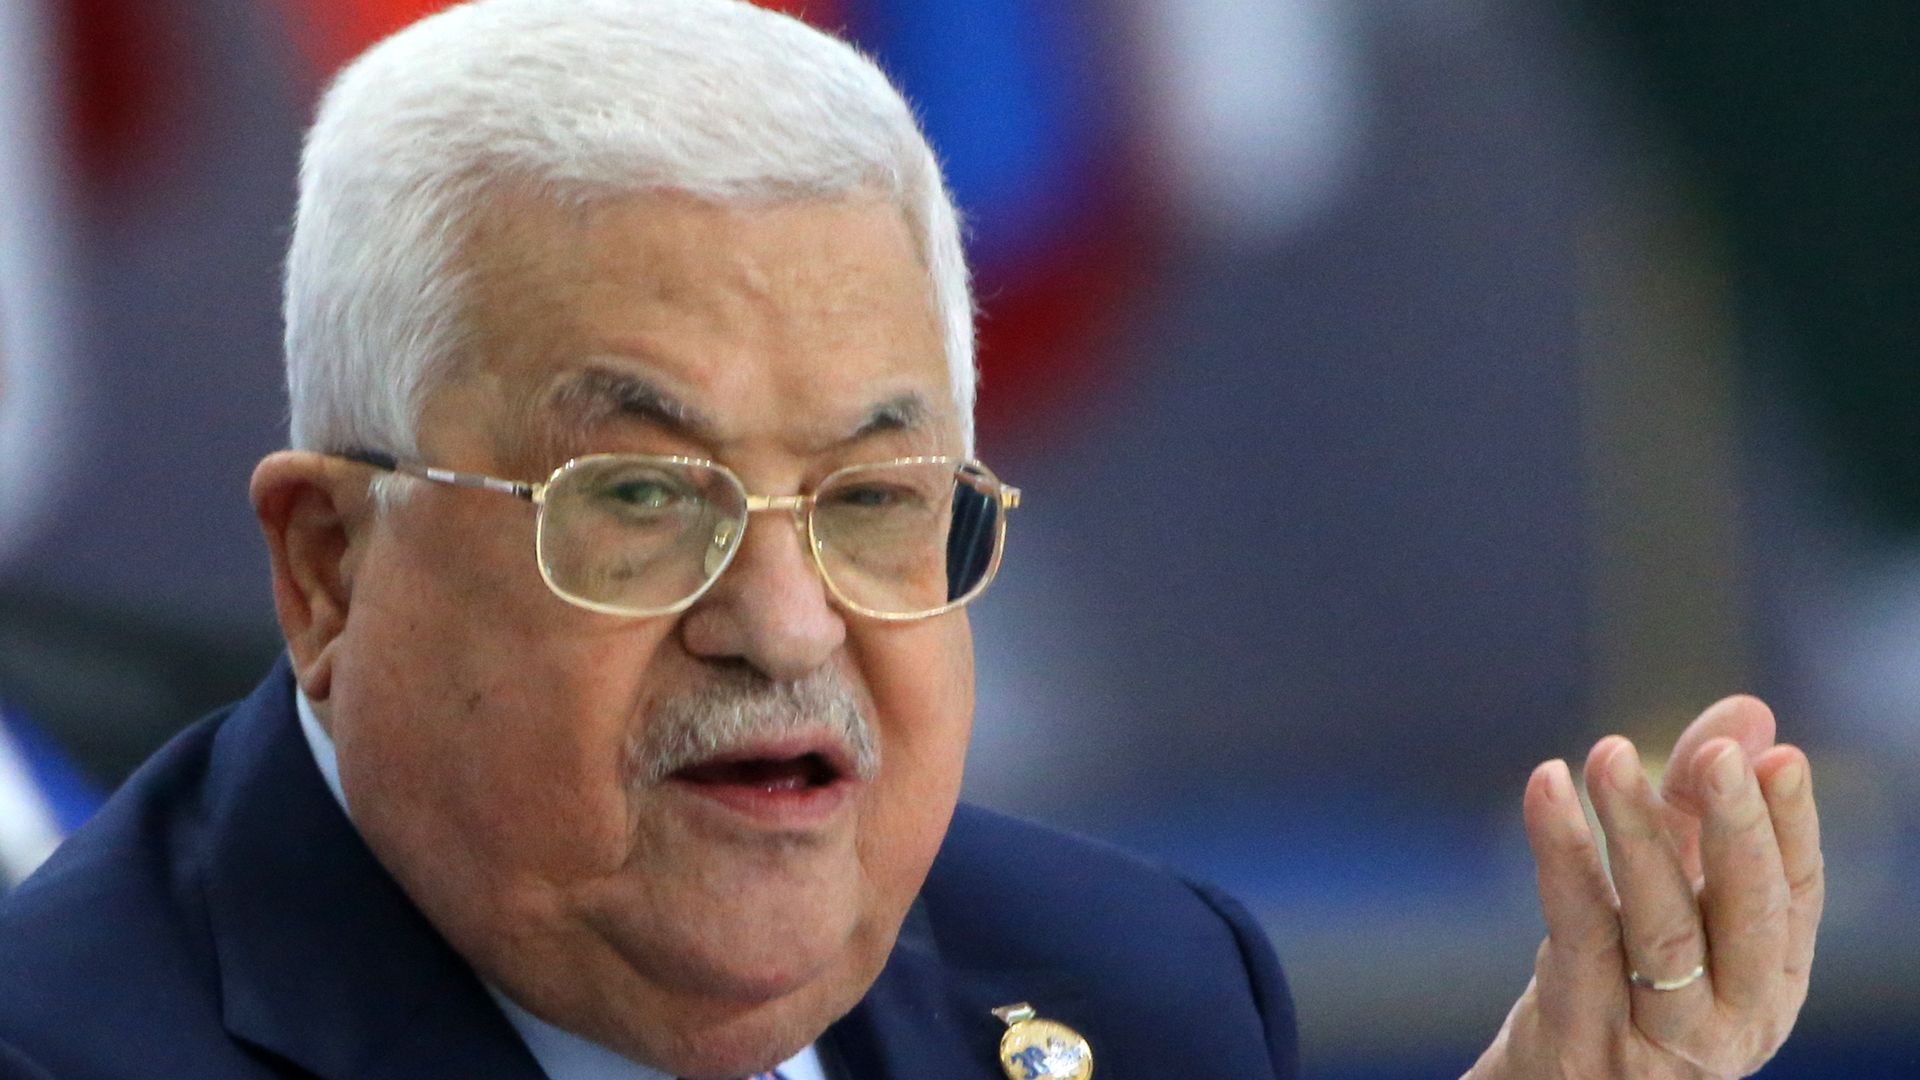 Palestinian President Mahmoud Abbas. Photo: Getty Images